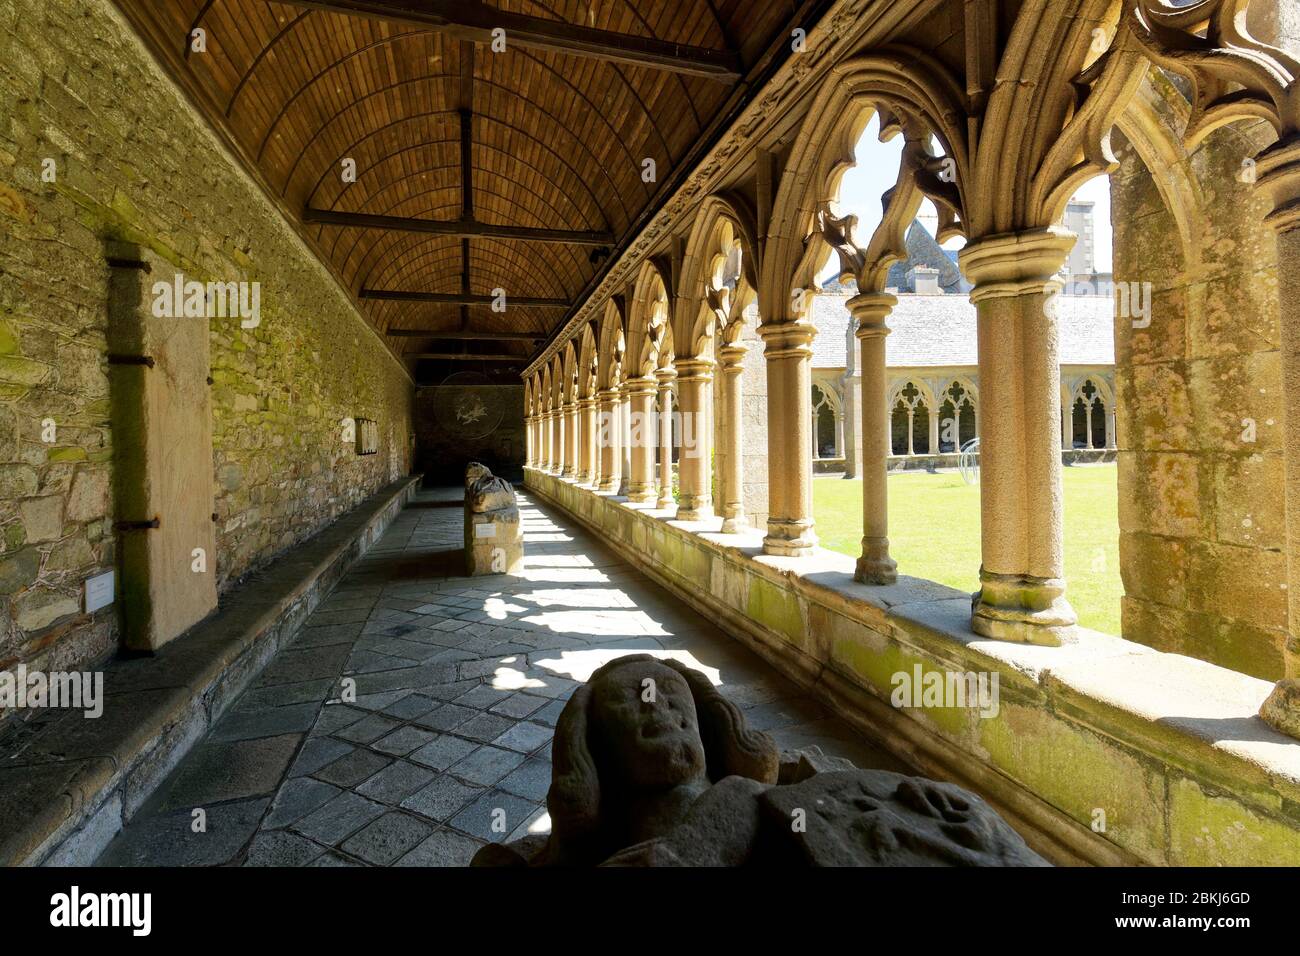 France, Cotes d'Armor, Treguier, Saint-Tugdual cathedral, the cloister in flamboyant gothic style from 1461 and recumbent statue Stock Photo